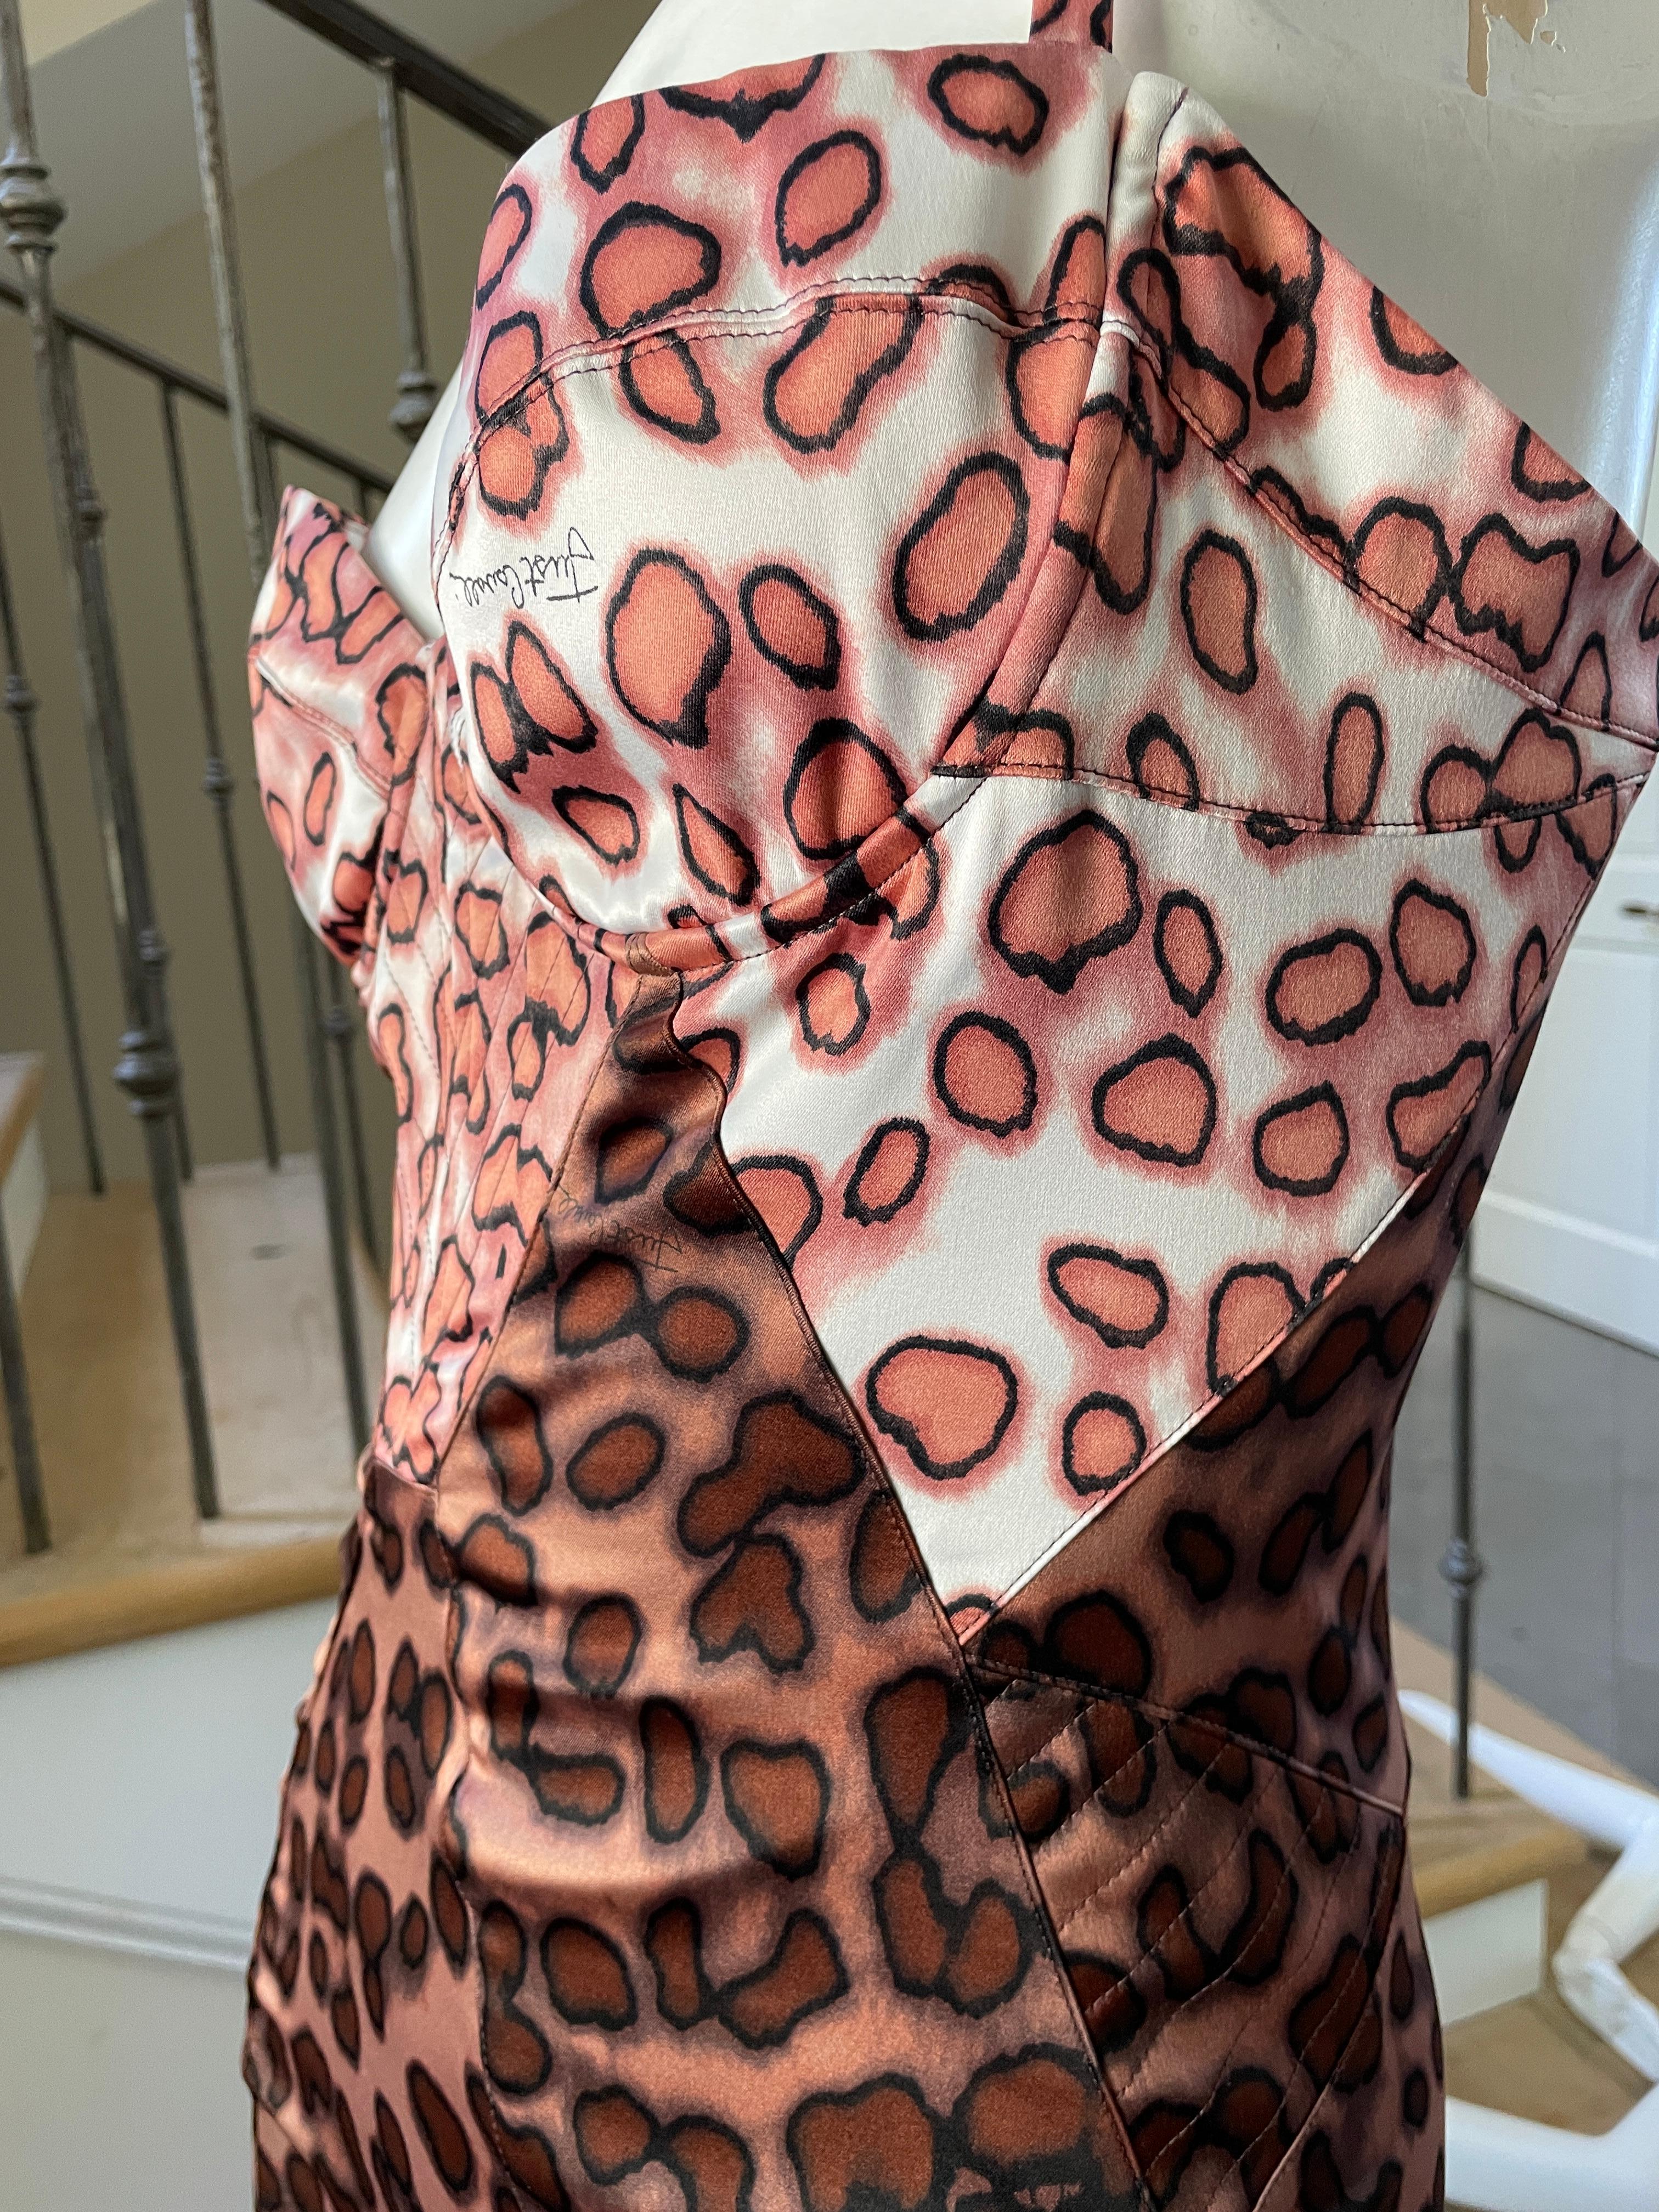 Just Cavalli Sexy Leopard Print Cocktail Dress by Roberto Cavalli For Sale 6